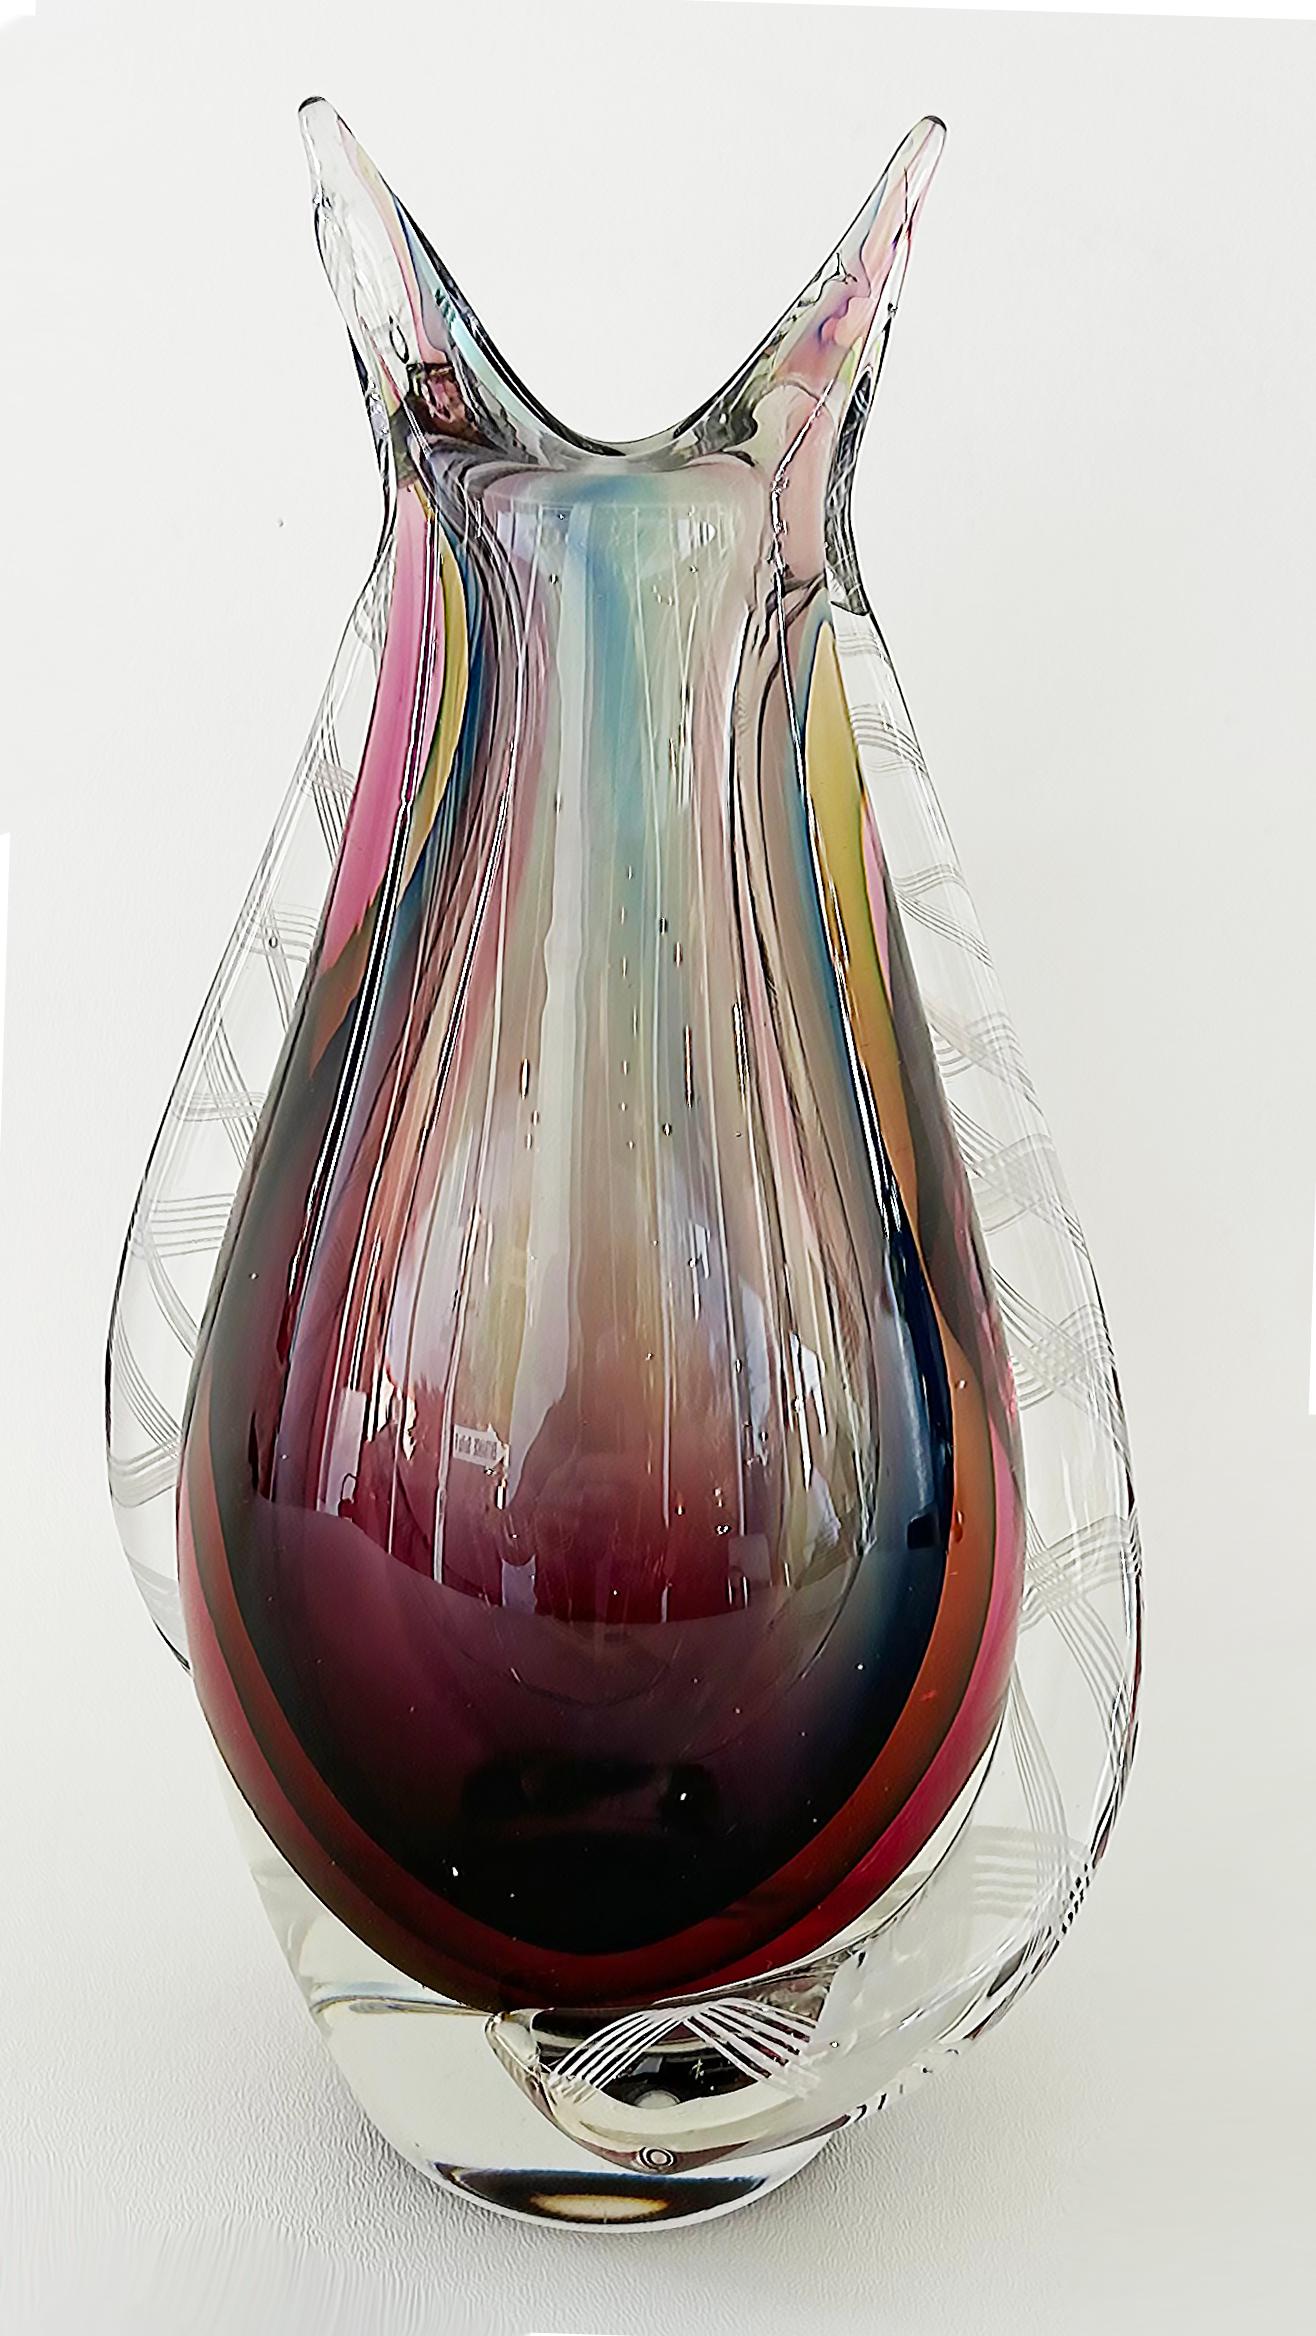 Rare Mid-century Murano Glass Flavio Poli Sommerso Vase, Filigrana Applied

Offered for sale is a rare mid-century modern Italian Murano glass iridescent serpent base in mint condition. The vase is unmarked but attributed to Flavio Poli for